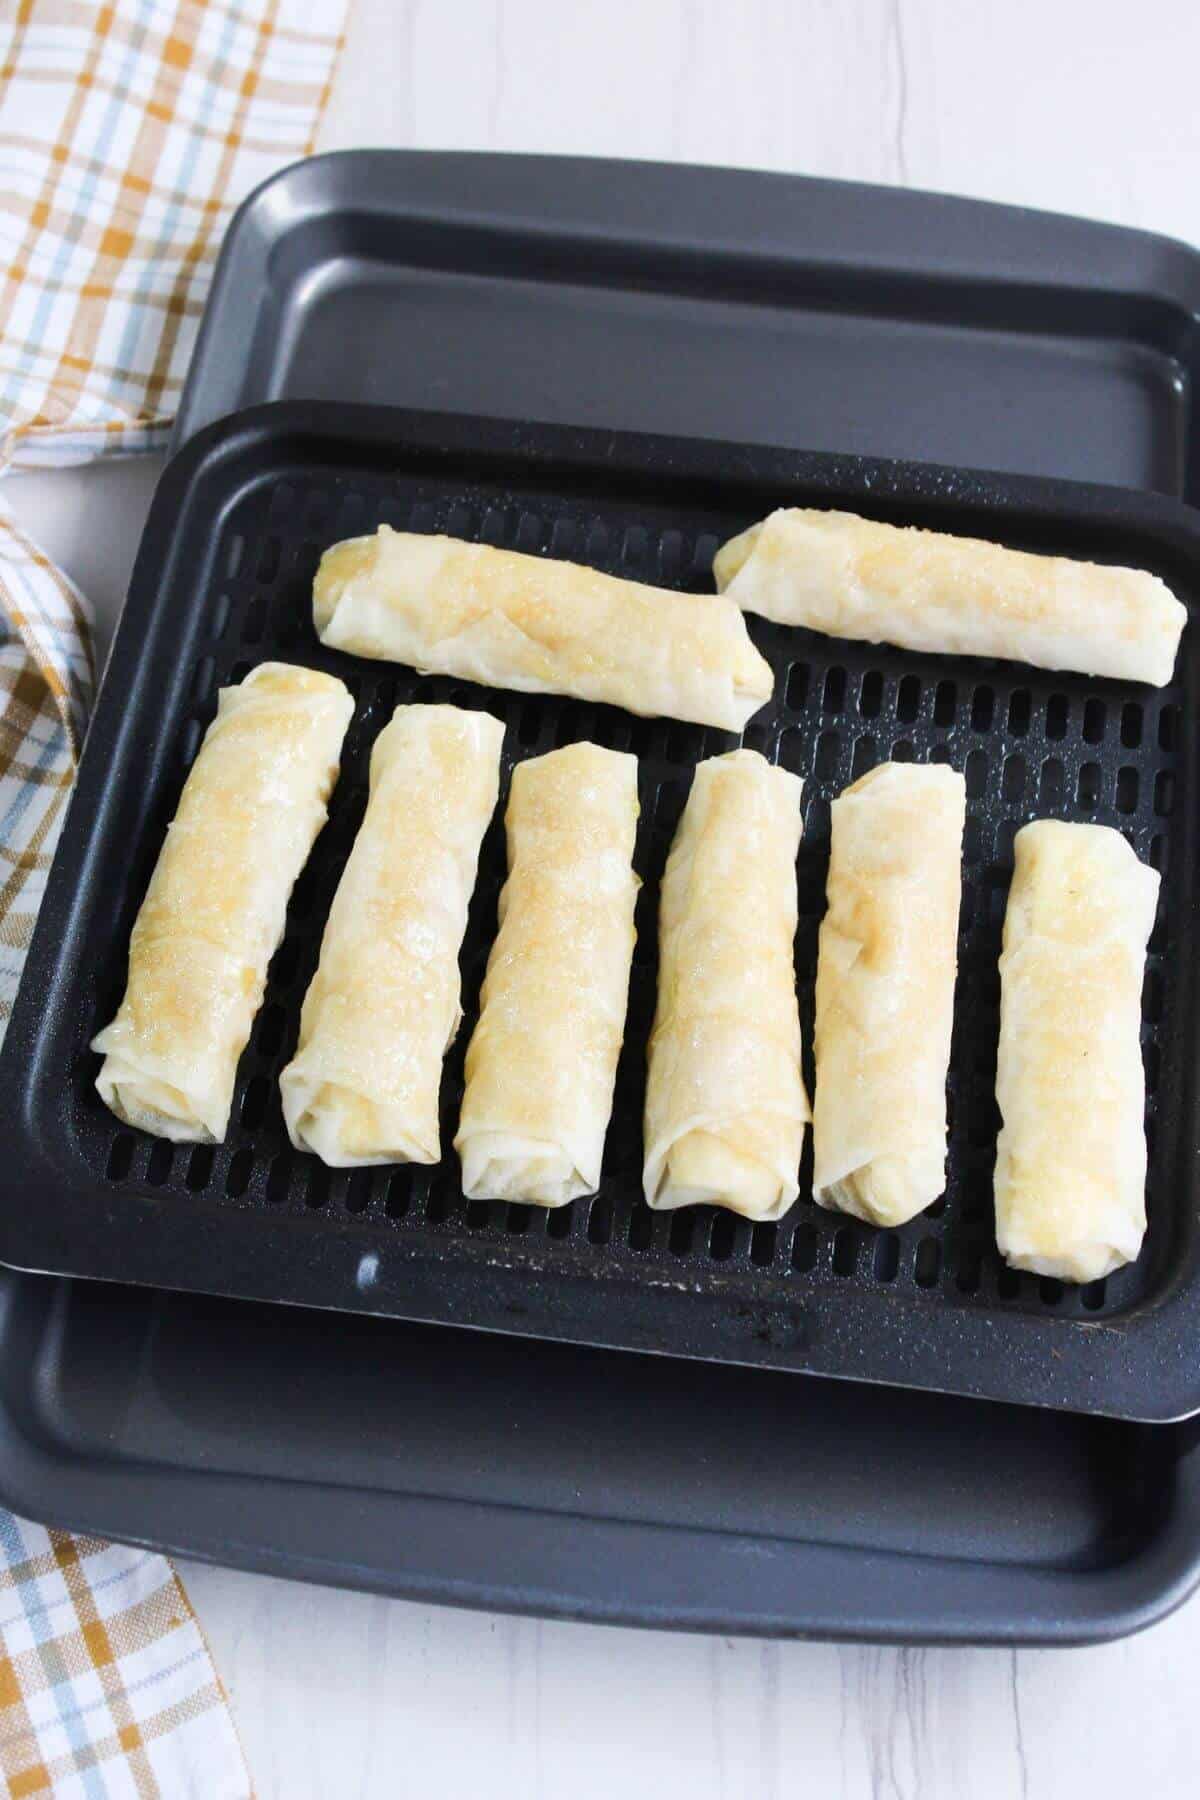 Air fryer tray with rolls of banana turon on it.